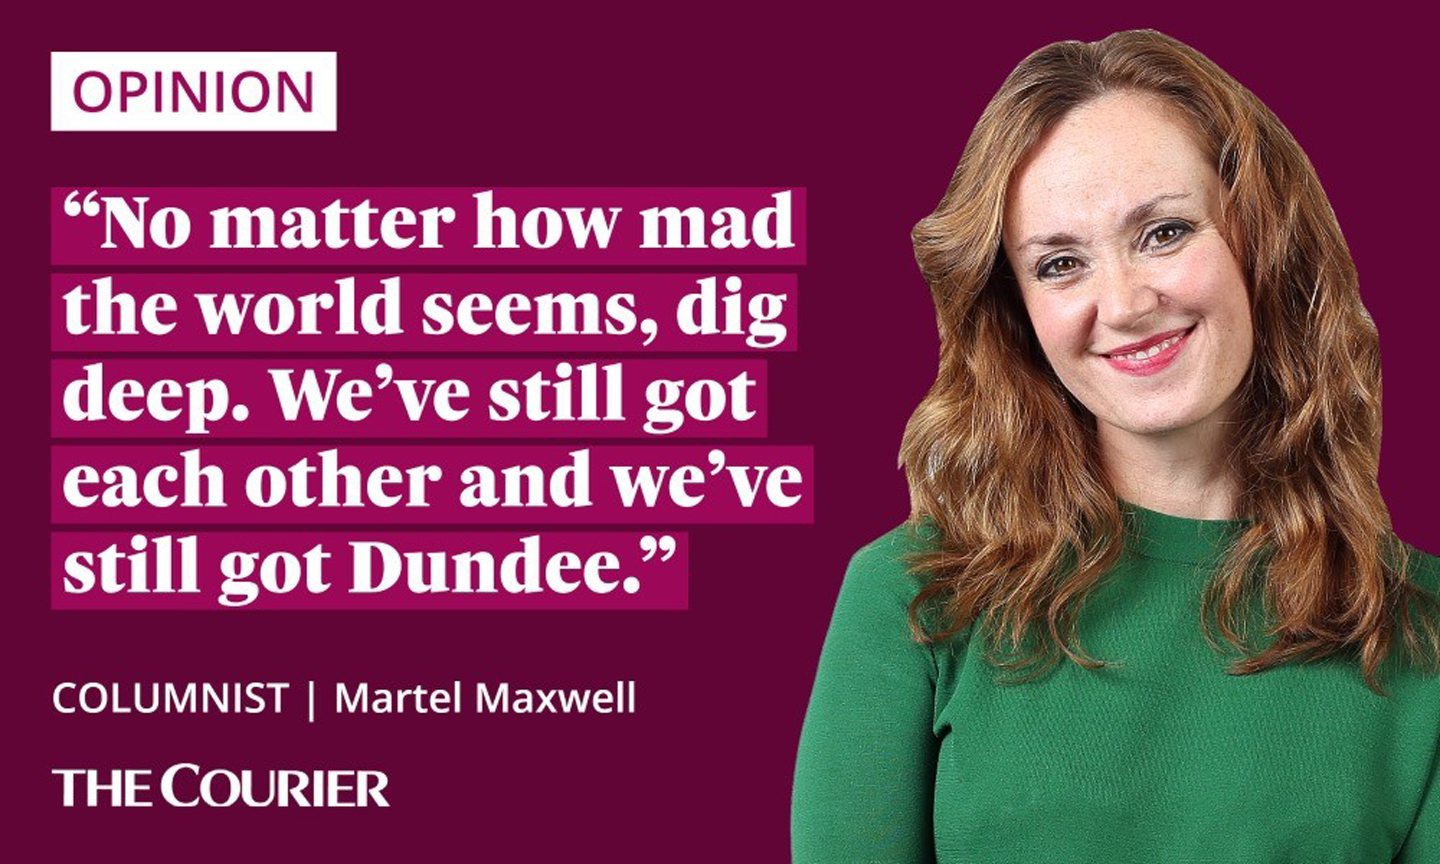 Martel Maxwell quote card saying: "No matter how mad the world seems, dig deep. We’ve still got each other and we’ve still got Dundee."